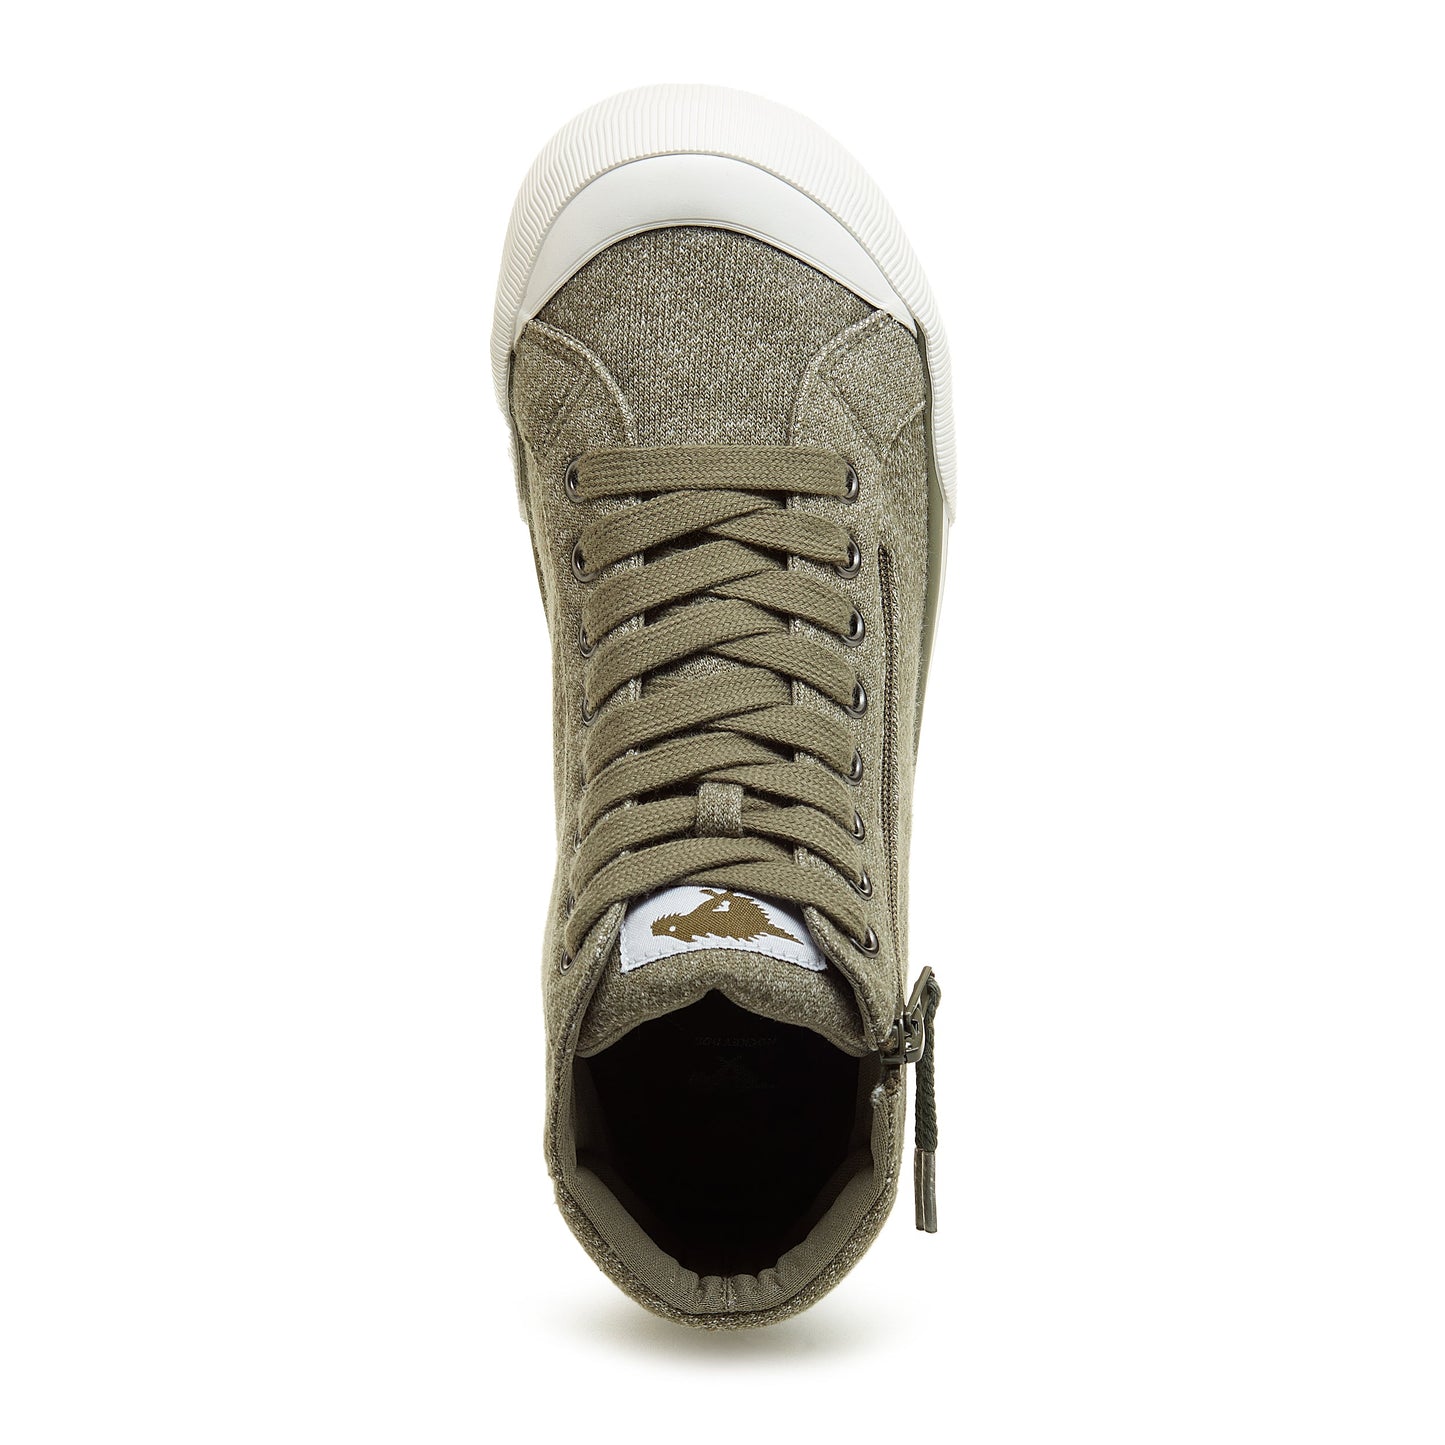 Jazzin Olive Jersey High Top Trainers